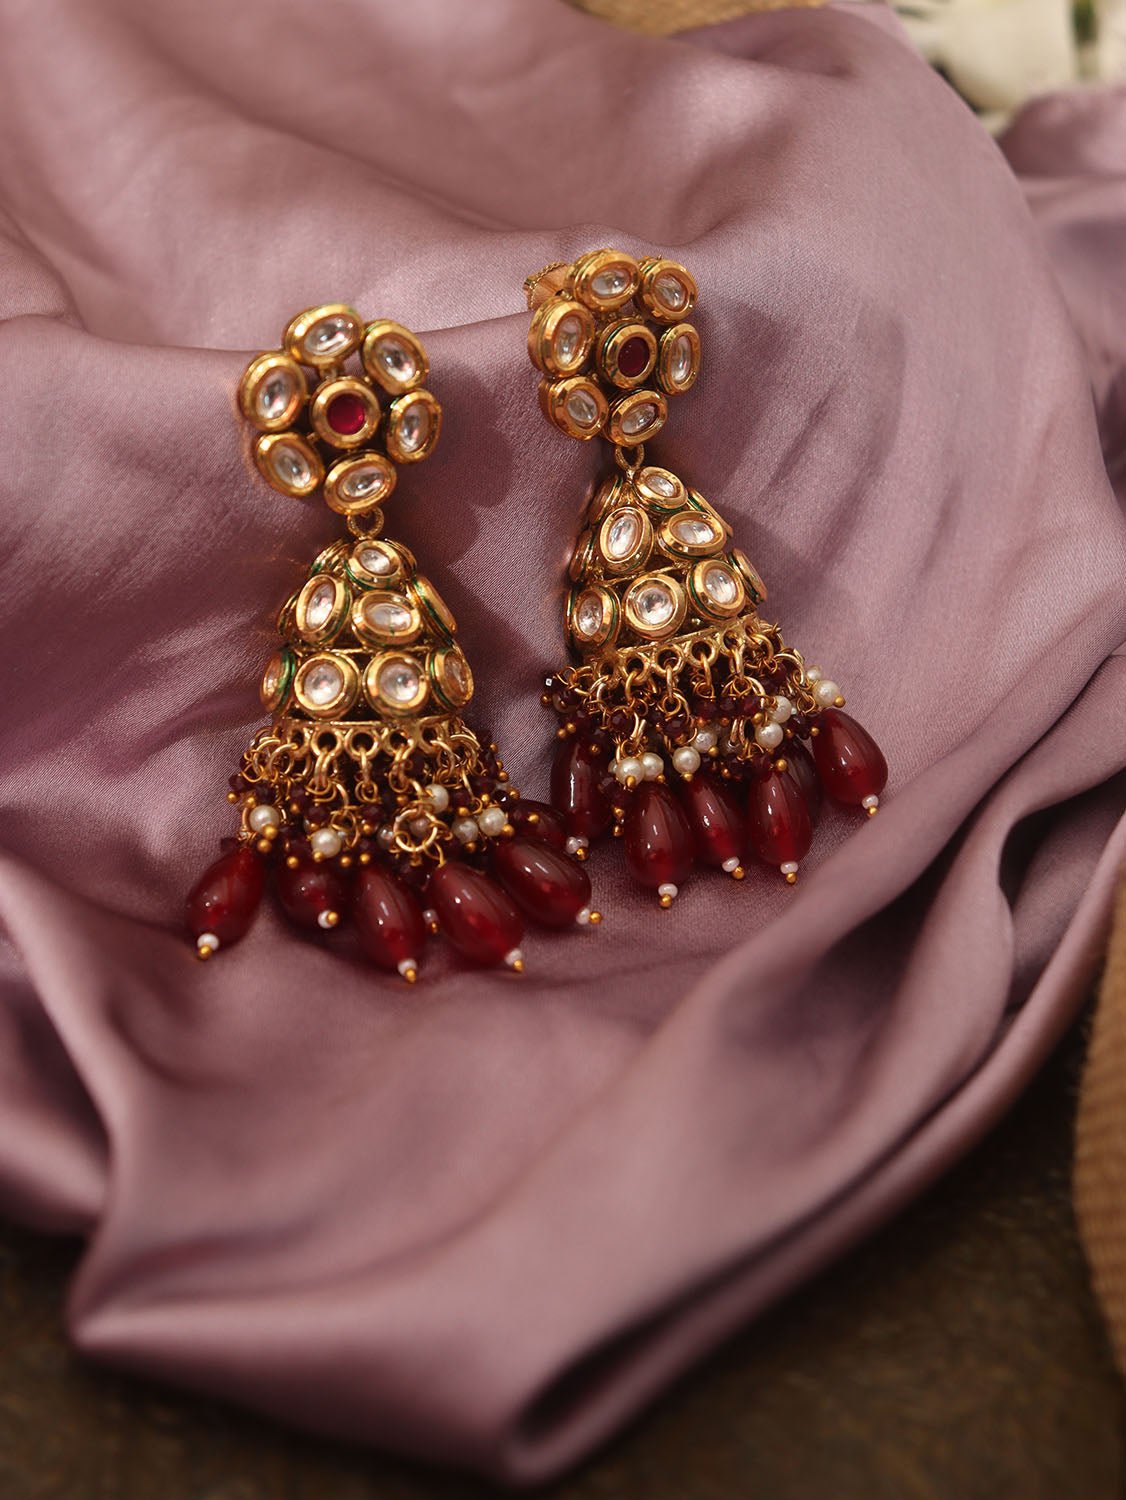 Shop Luxurionworld's Golden Delight Brass Earrings - Elevate Your Style Today!